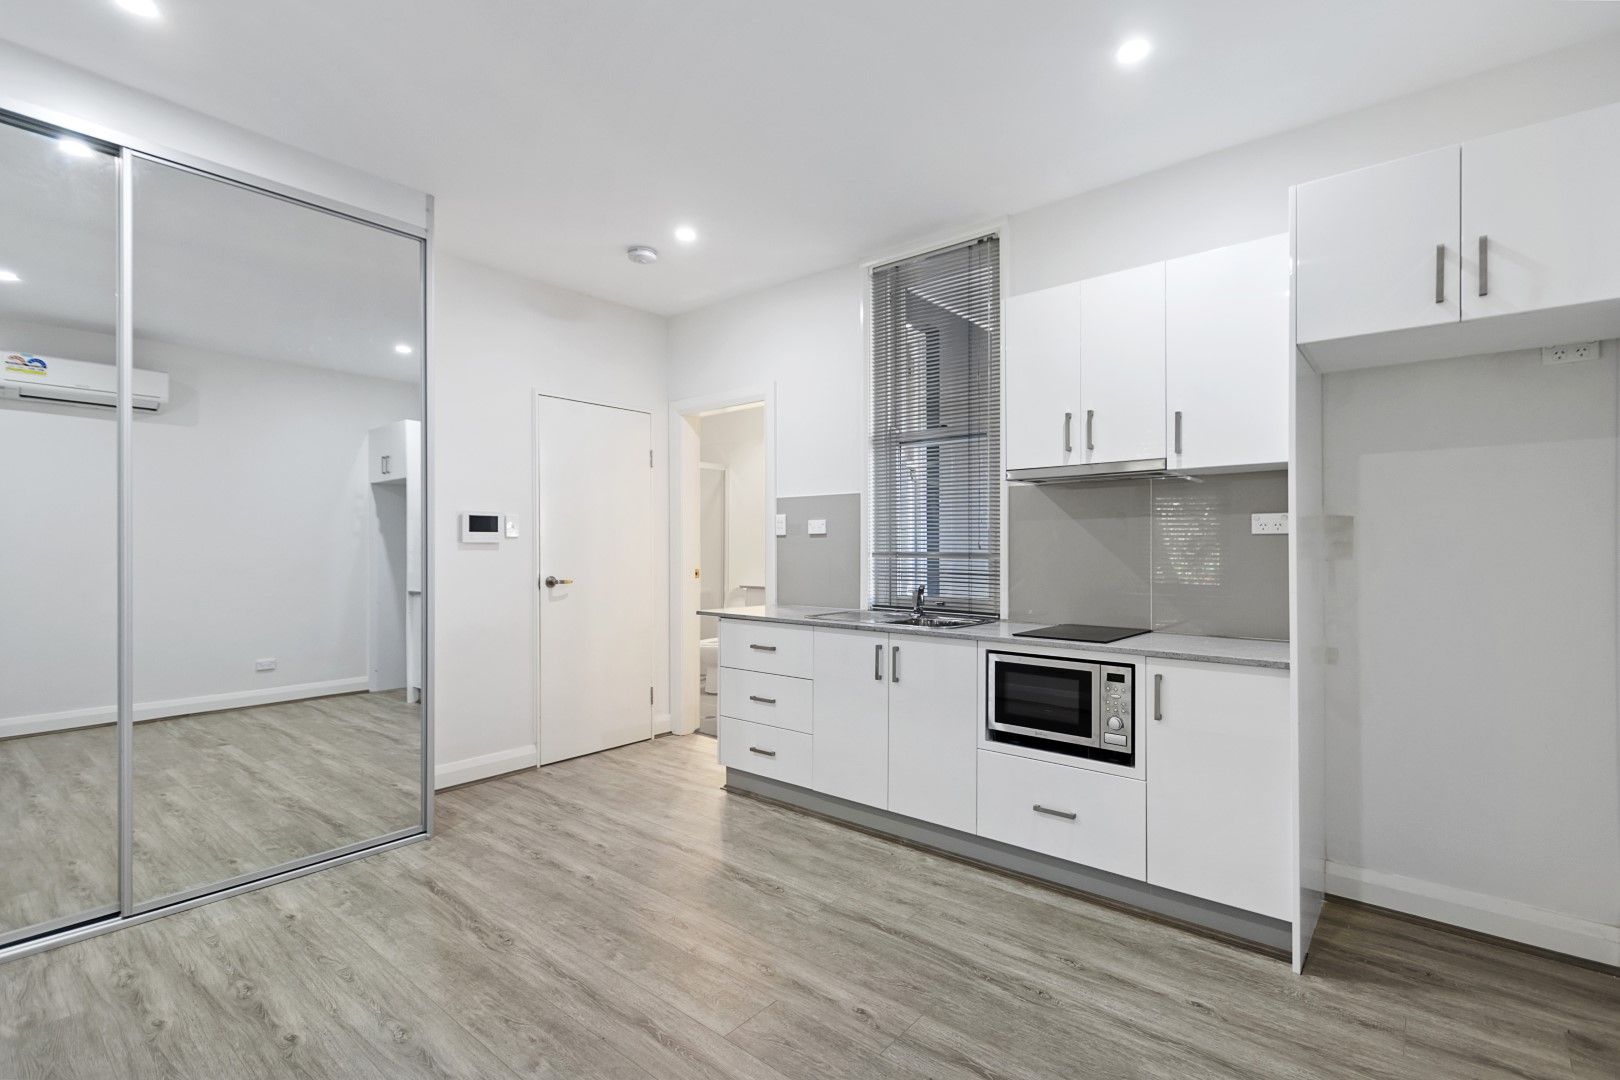 107 West St, Crows Nest NSW 2065, Image 2